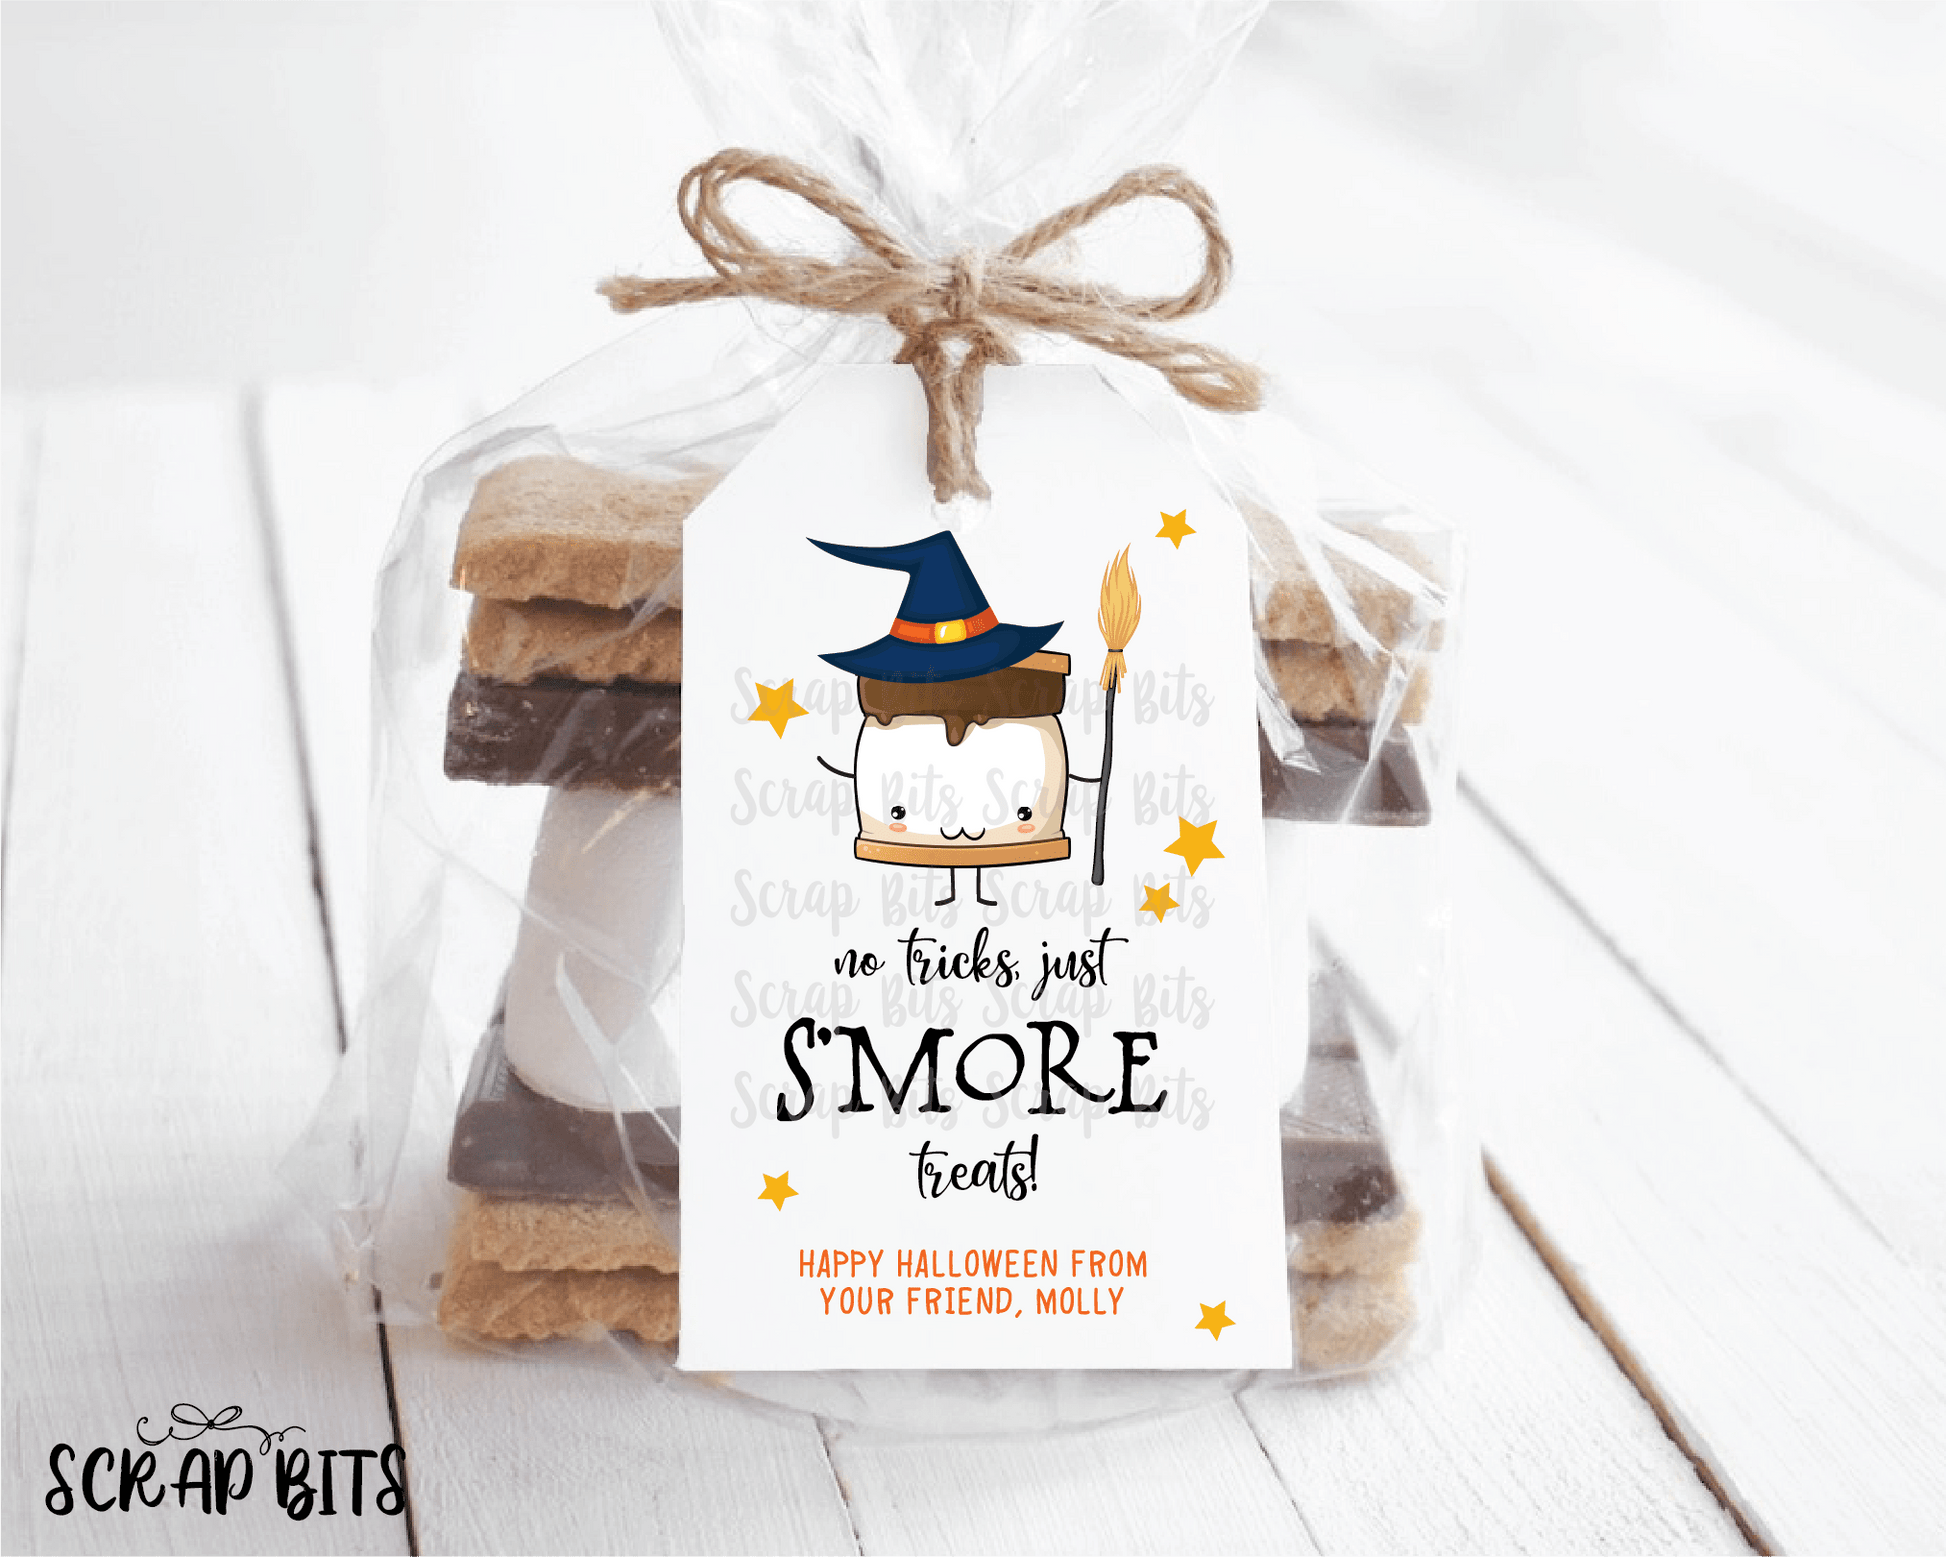 No Tricks Just S'more Treats Witch S'more Tags . Halloween Treat Bag Tags - Scrap Bits